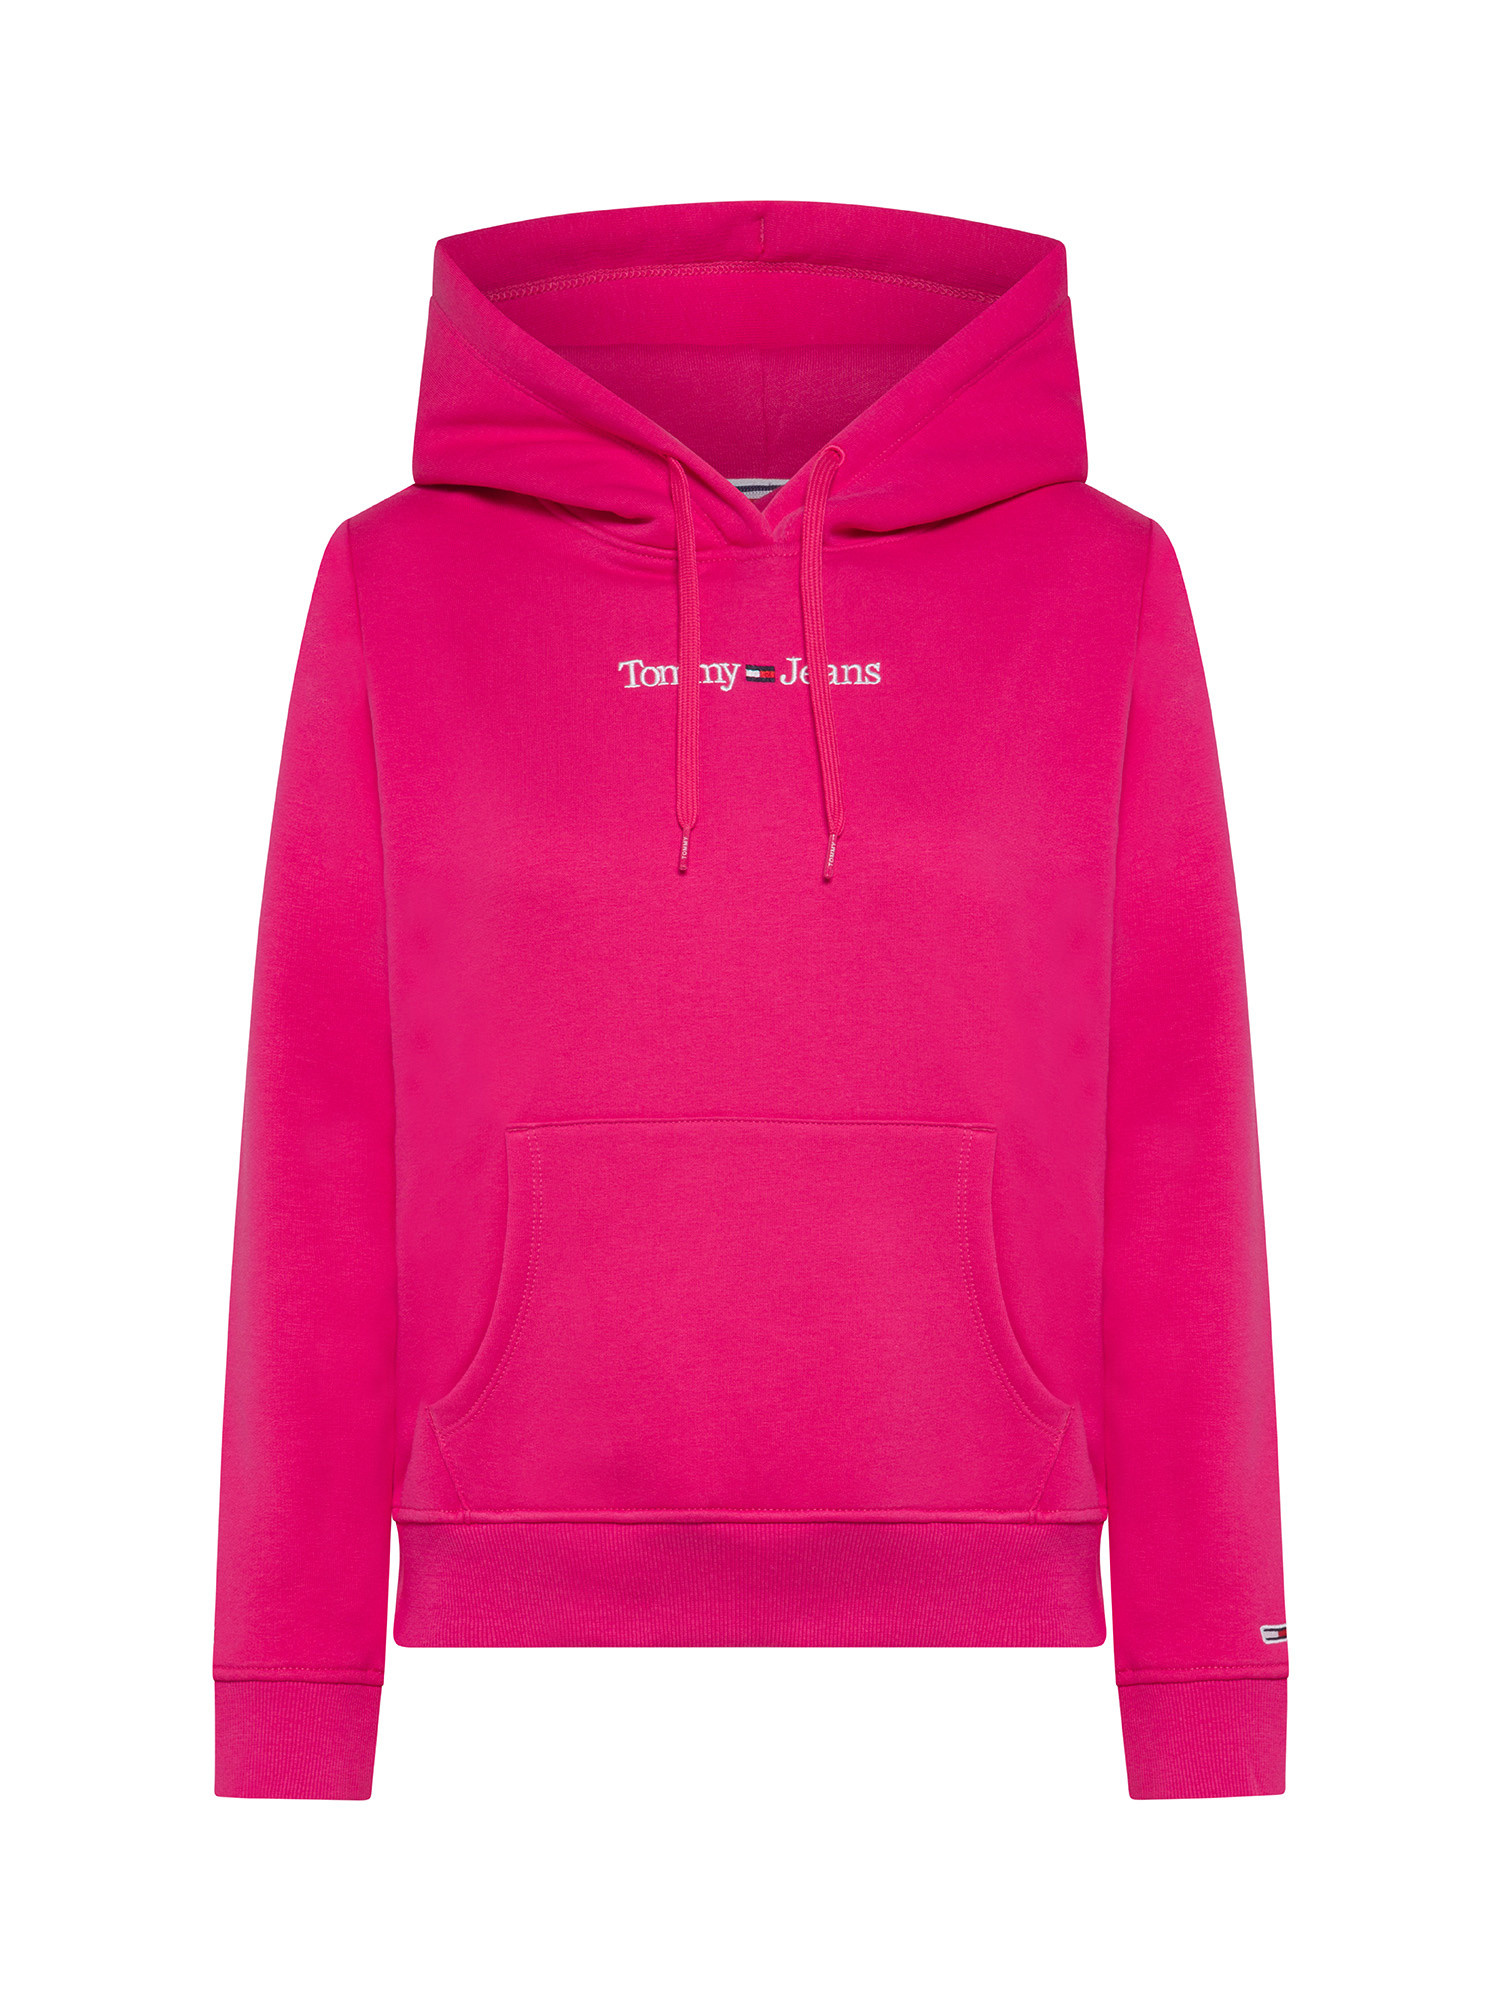 Tommy Jeans - Cotton hooded sweatshirt, Pink Fuchsia, large image number 0